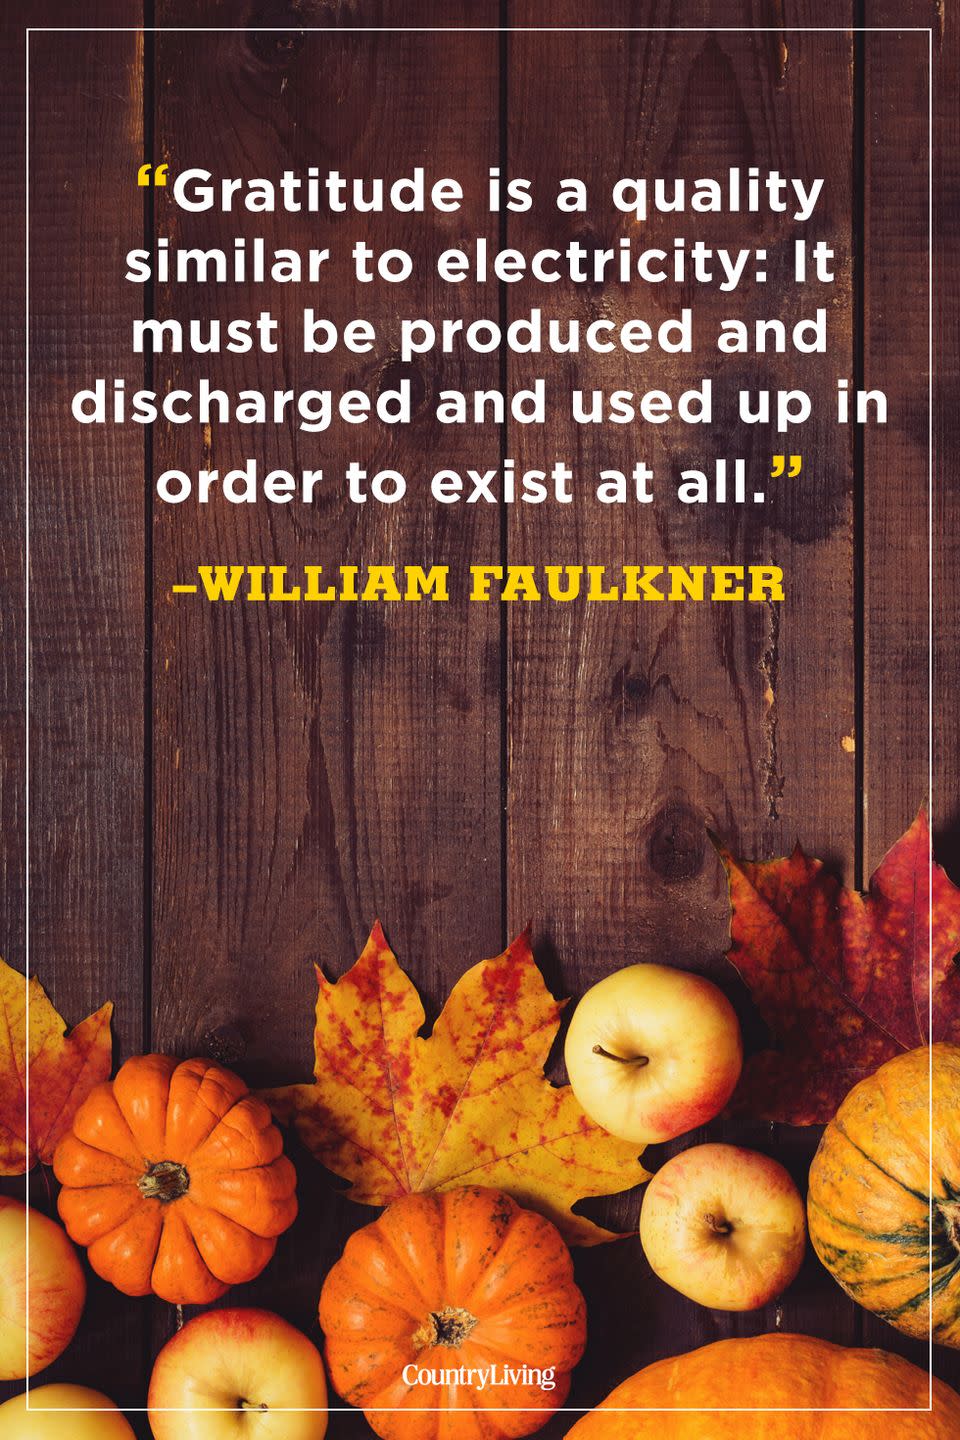 <p>"Gratitude is a quality similar to electricity: It must be produced and discharged and used up in order to exist at all."</p>